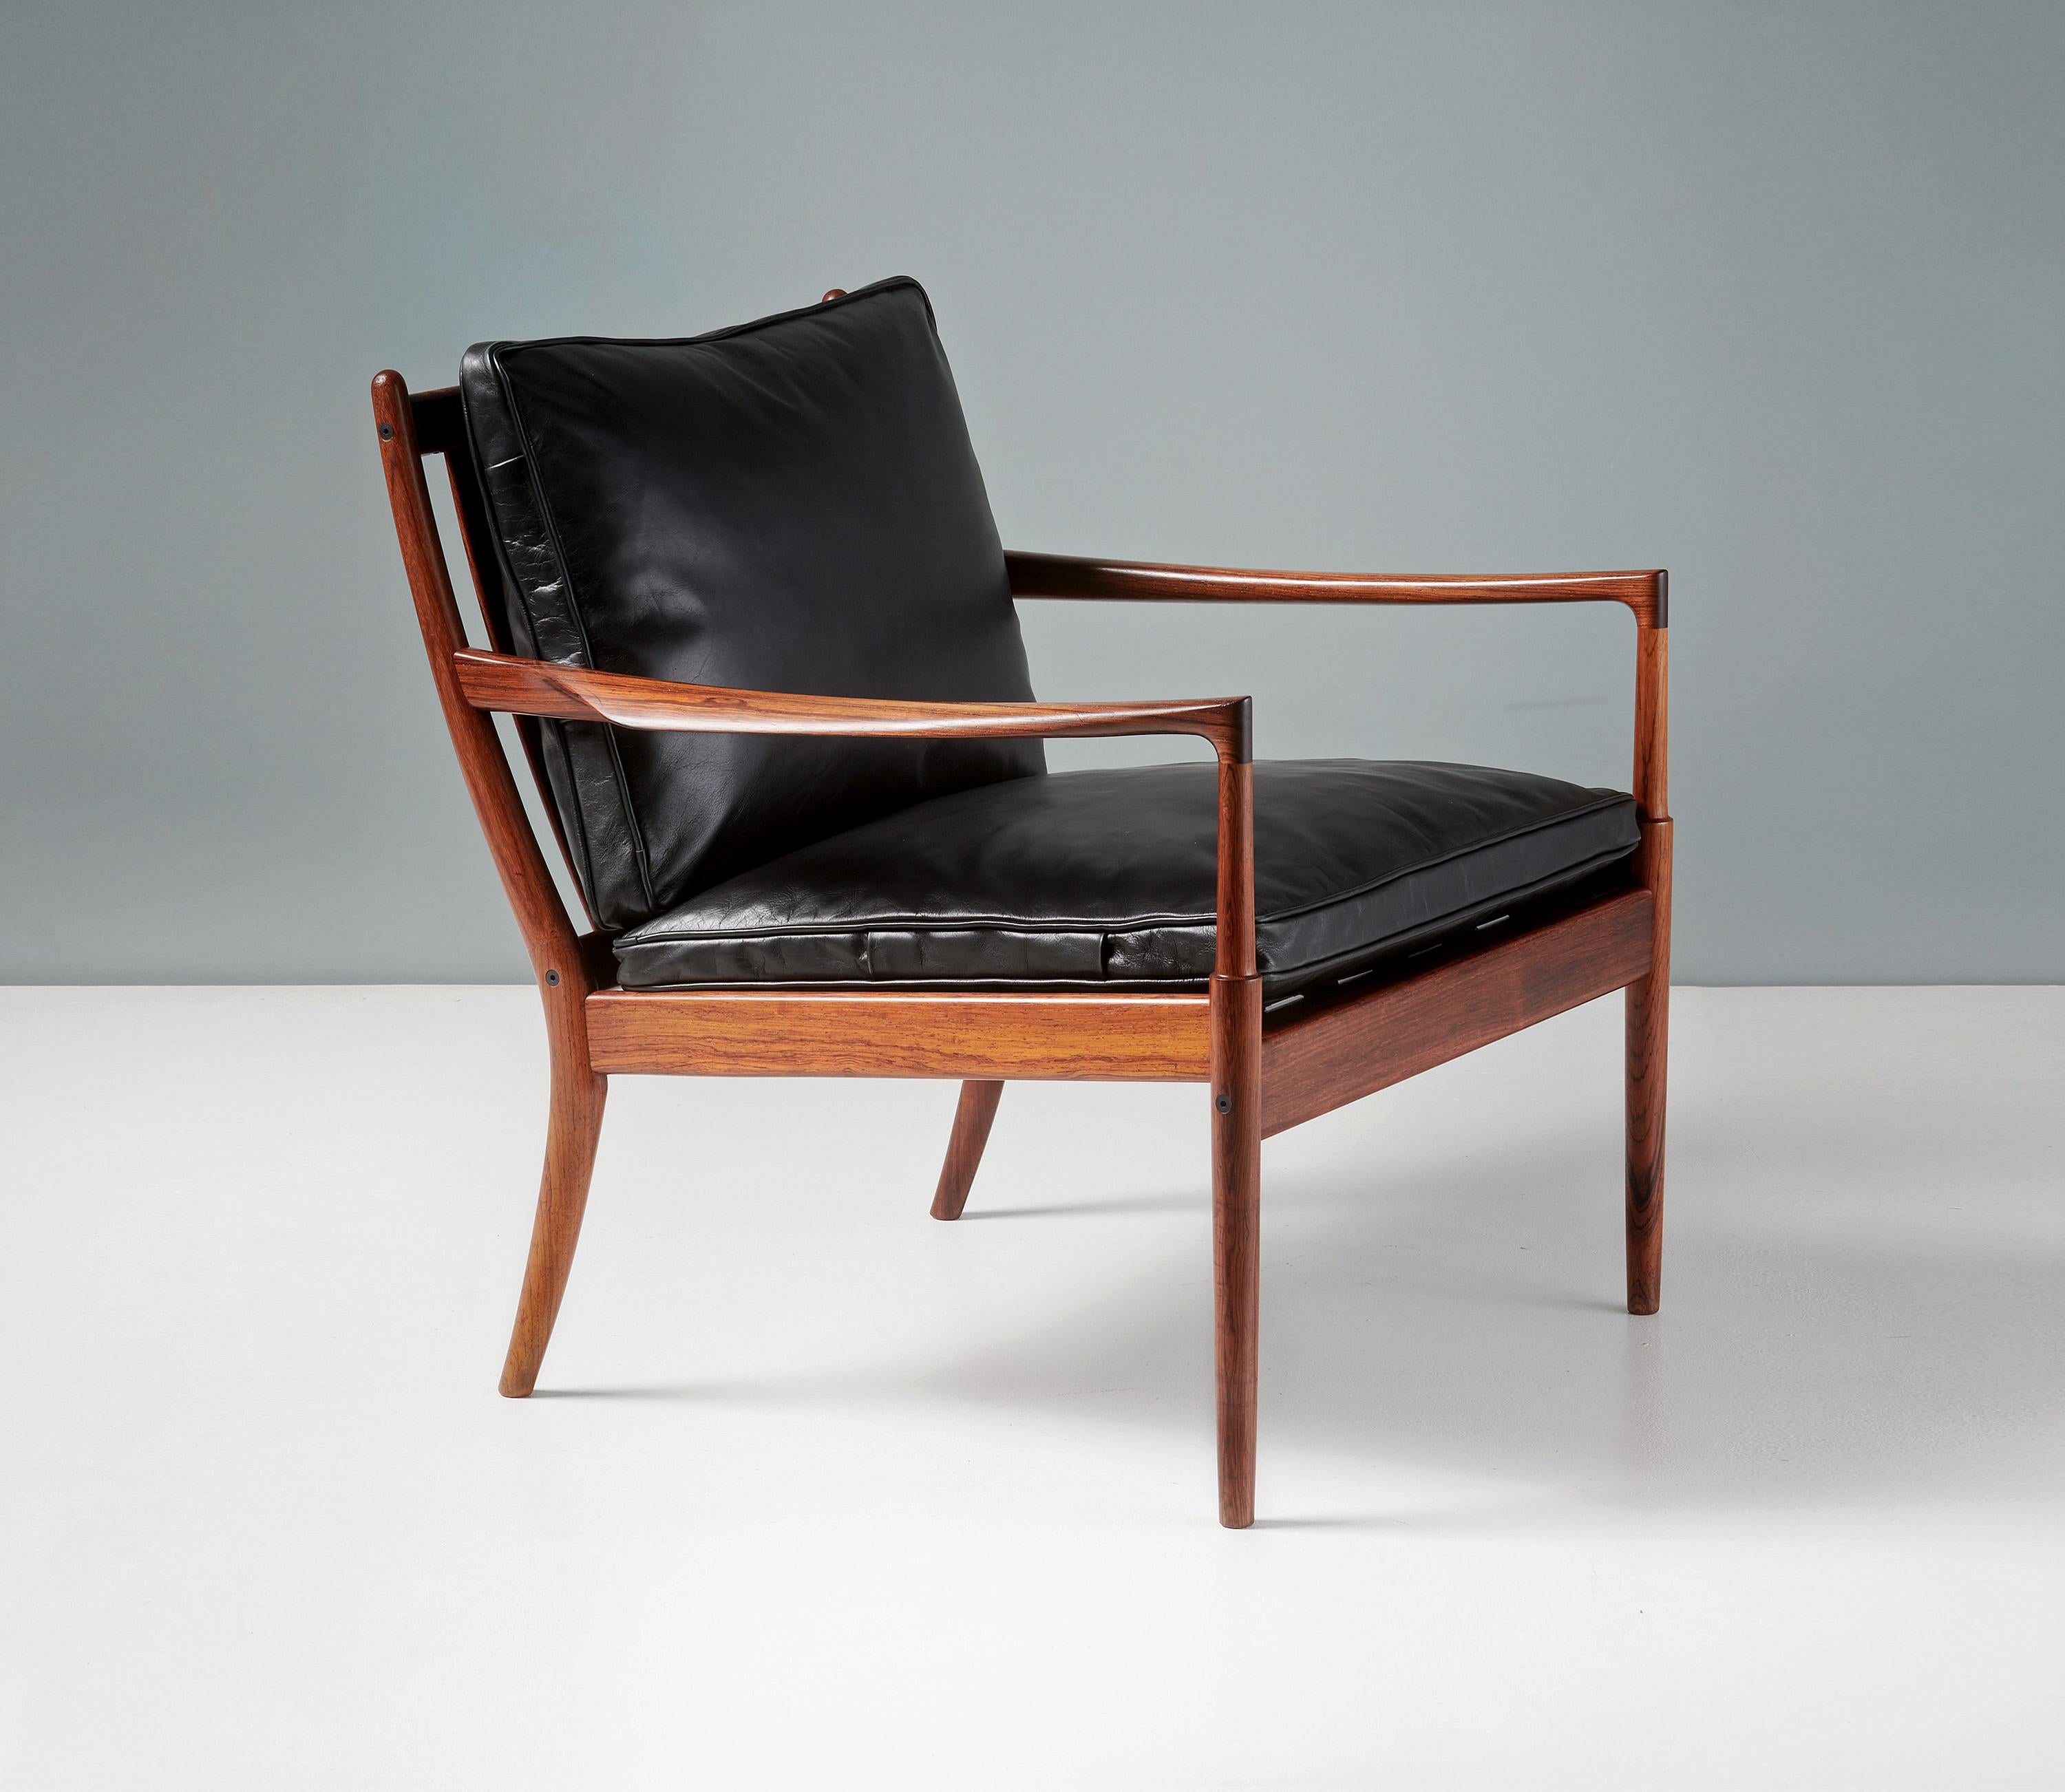 Ib Kofod-Larsen - Samso Lounge Chair, 1958

Rare lounge chair produced for Olof Perssons Fatoljindustri (OPE) in Jonkoping, Sweden and designed by Danish master designer Ib Kofod-Larsen. The frame is made from rosewood and has been refinished in